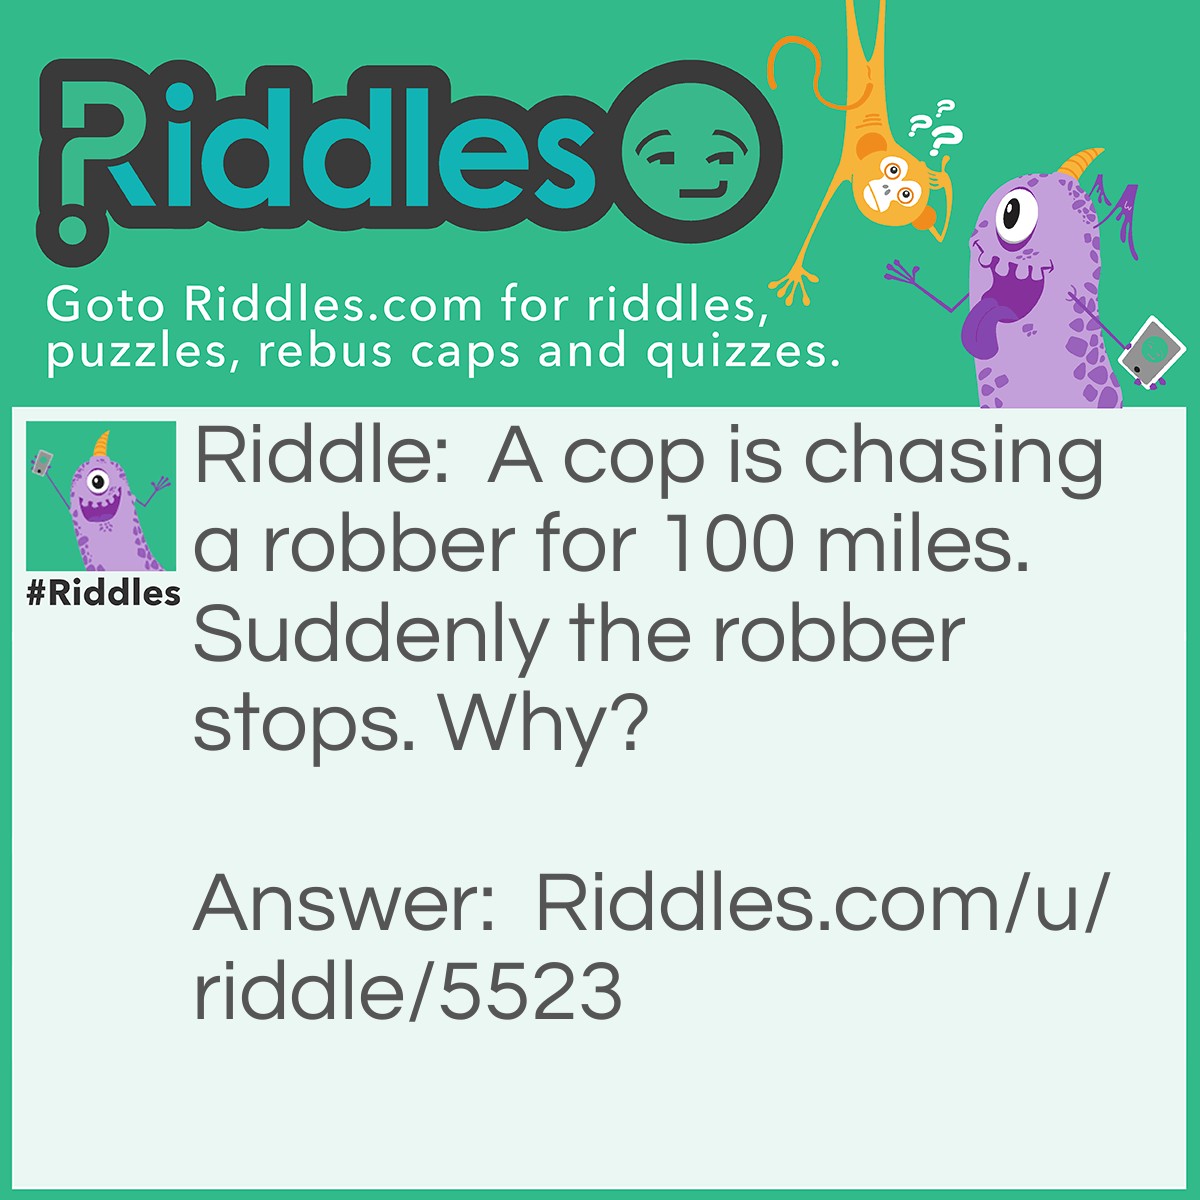 Riddle: A cop is chasing a robber for 100 miles. Suddenly the robber stops. Why? Answer: The robber ran out of gas.